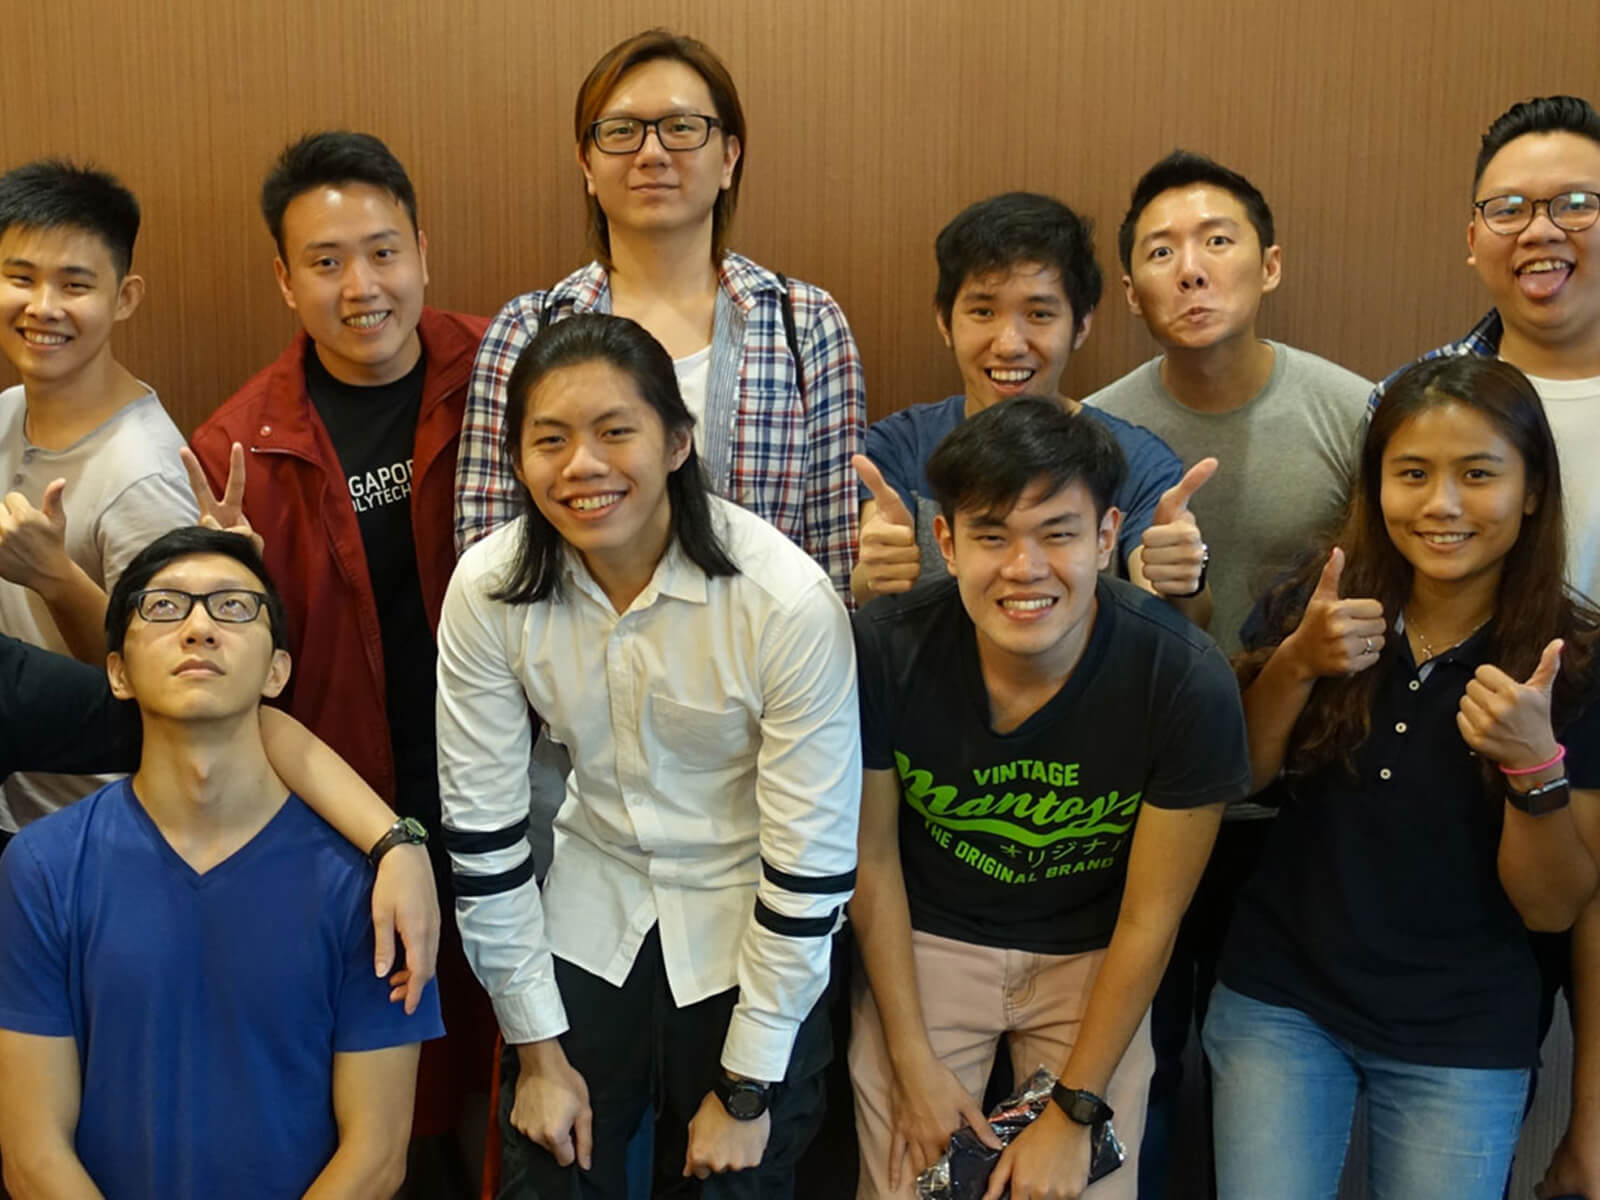 A large group of DigiPen (Singapore) Student Ambassadors smile for the camera, flashing peace and thumbs-up signs